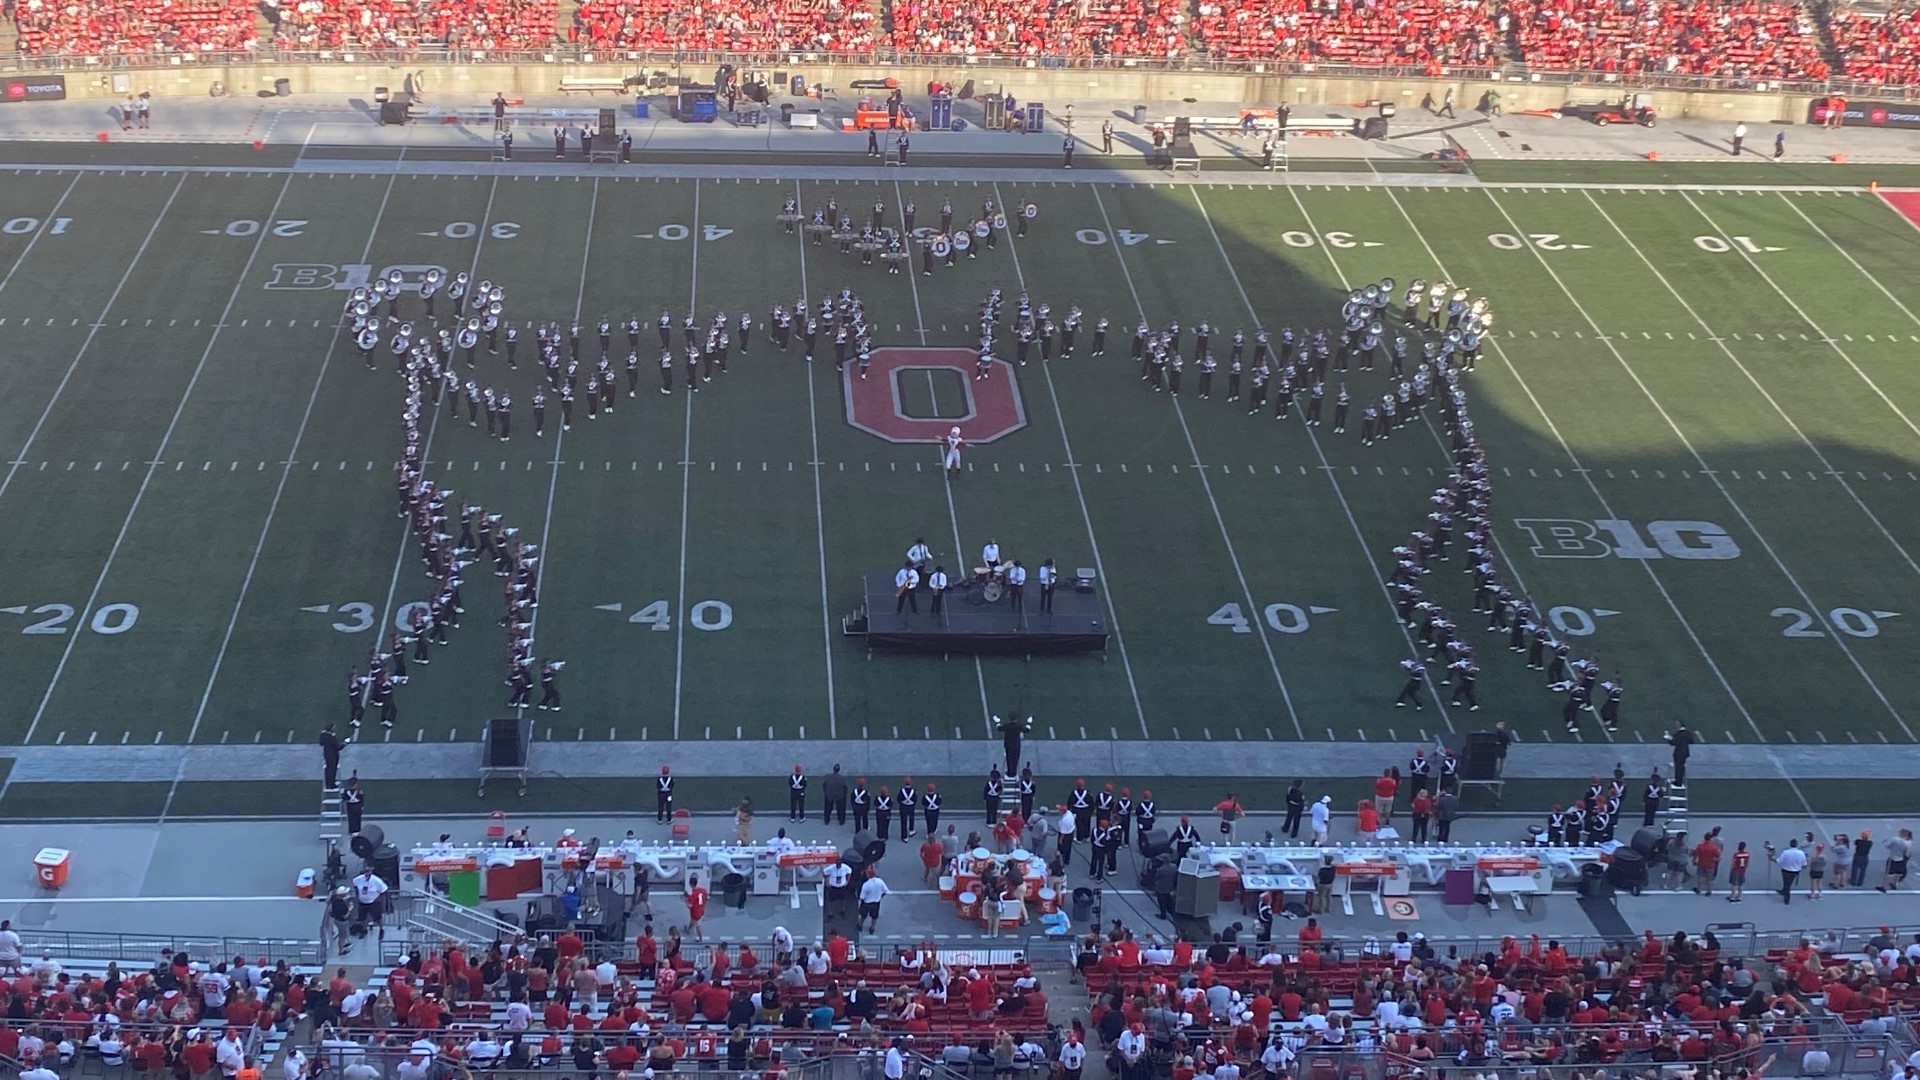 The sights and sounds of the Roaring 20s were on display in Ohio Stadium Saturday during the Ohio State Marching Band's halftime show.